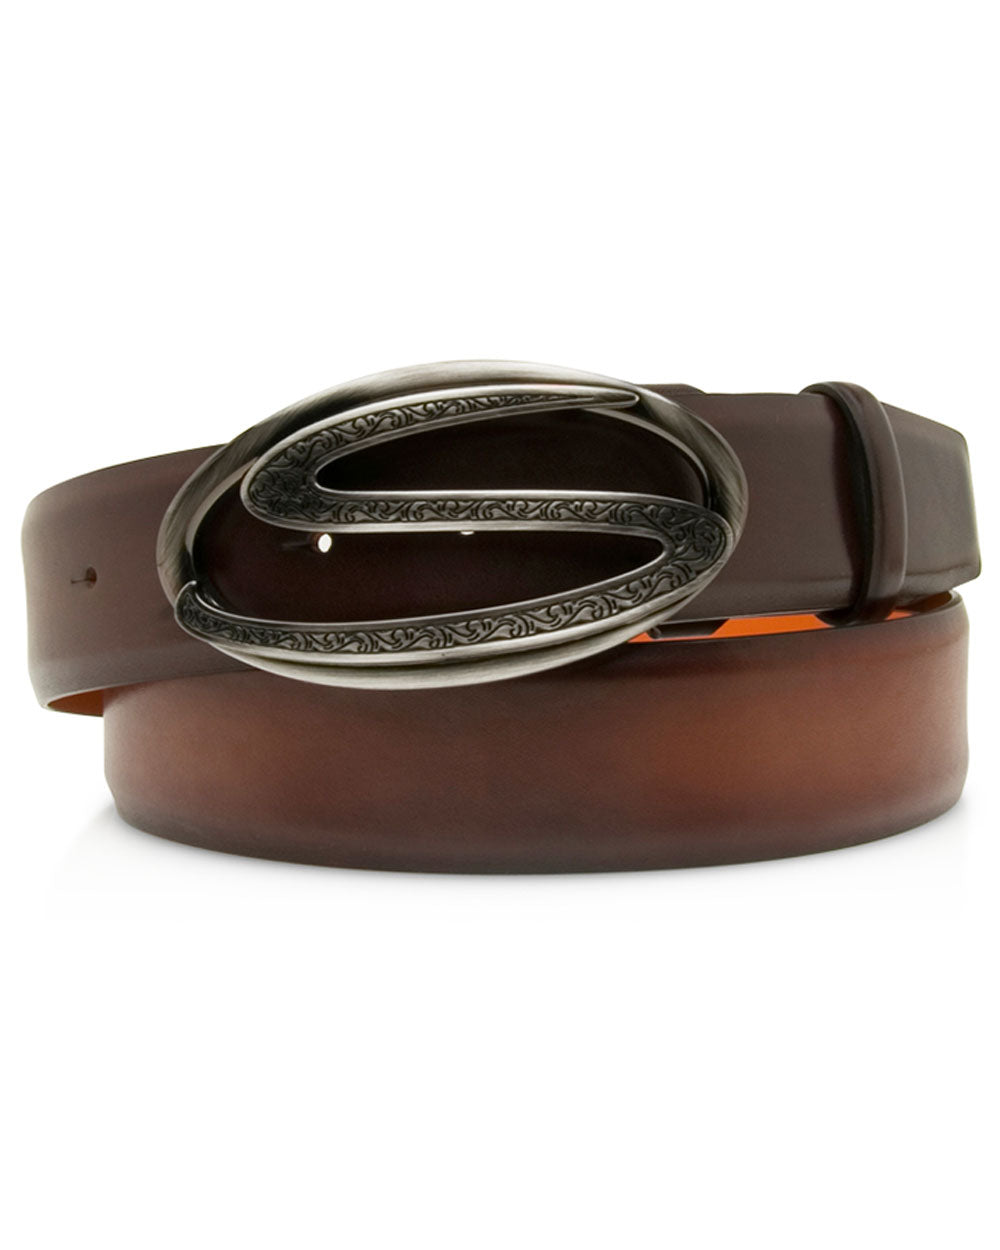 Buy Zacharias Men's Braided Leather Belt Brown 001A at